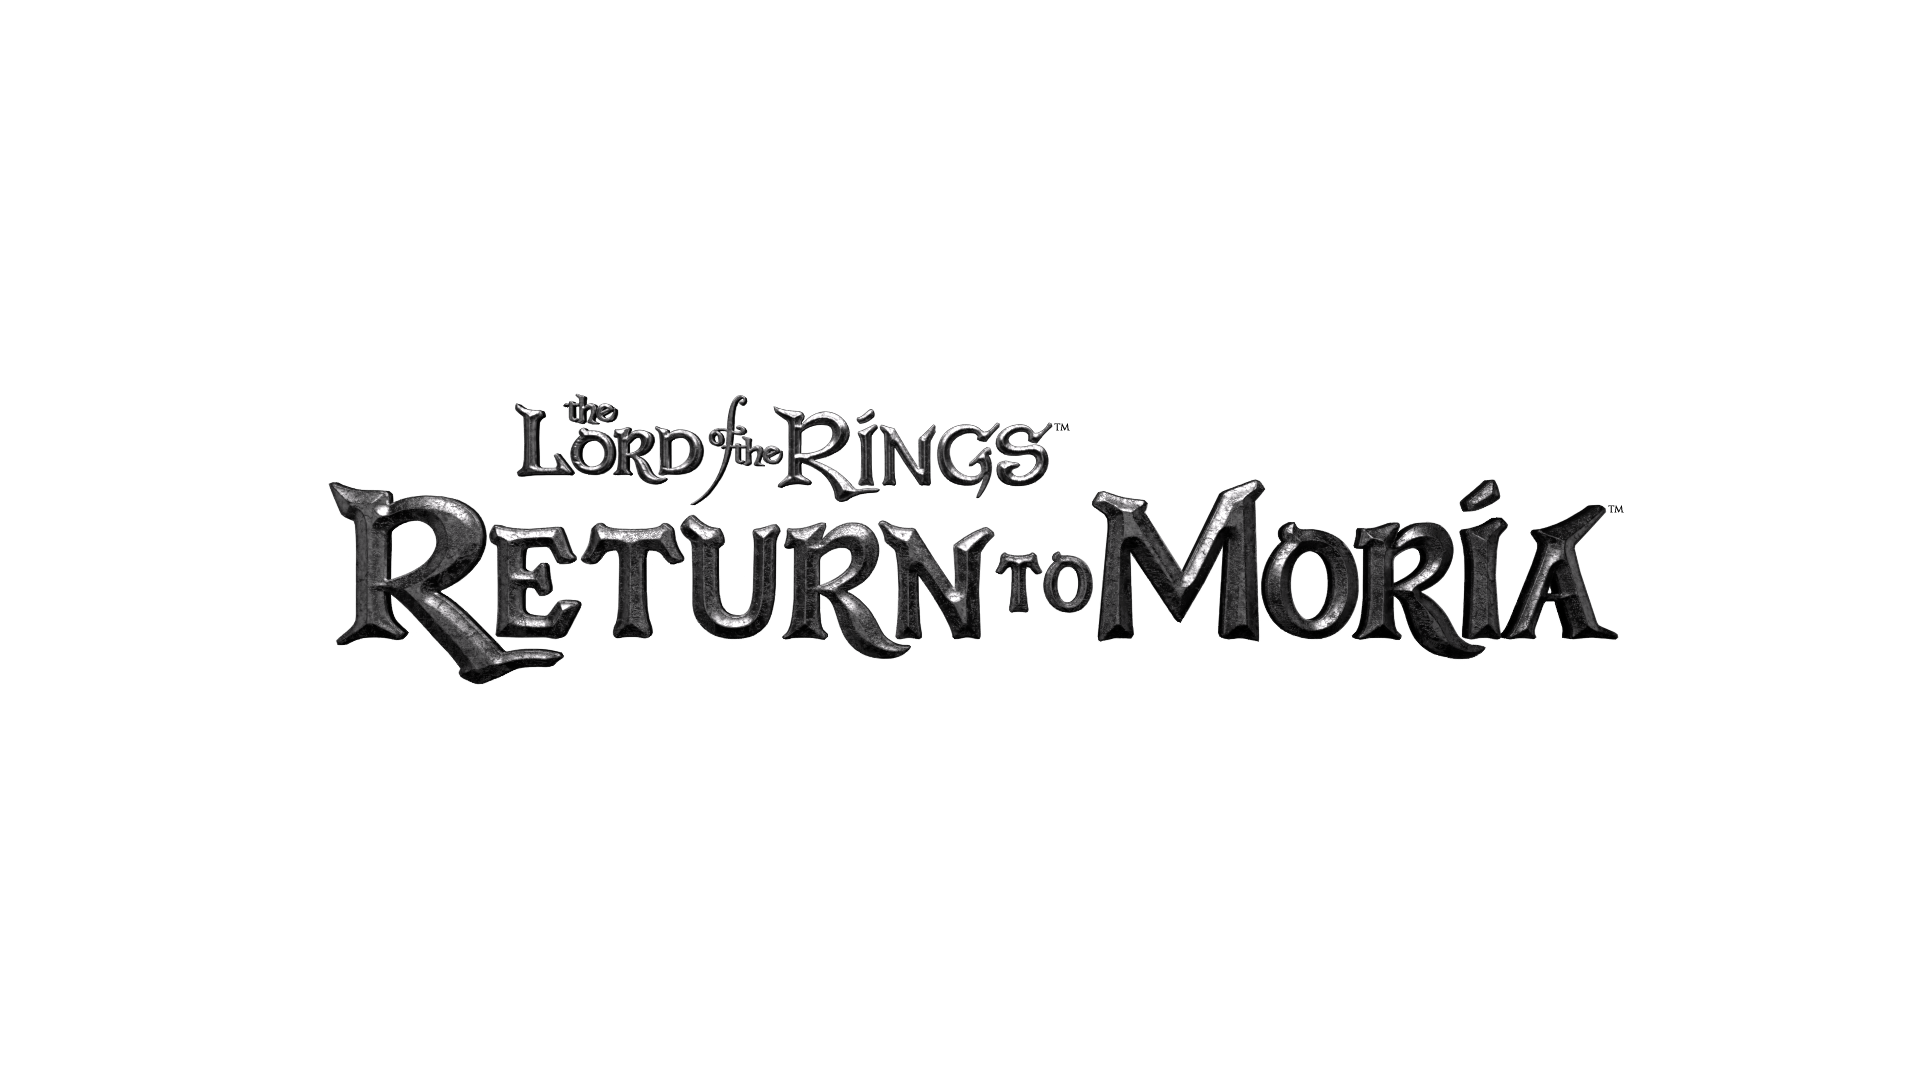 Lord of the Rings: Return to Moria launches for PC